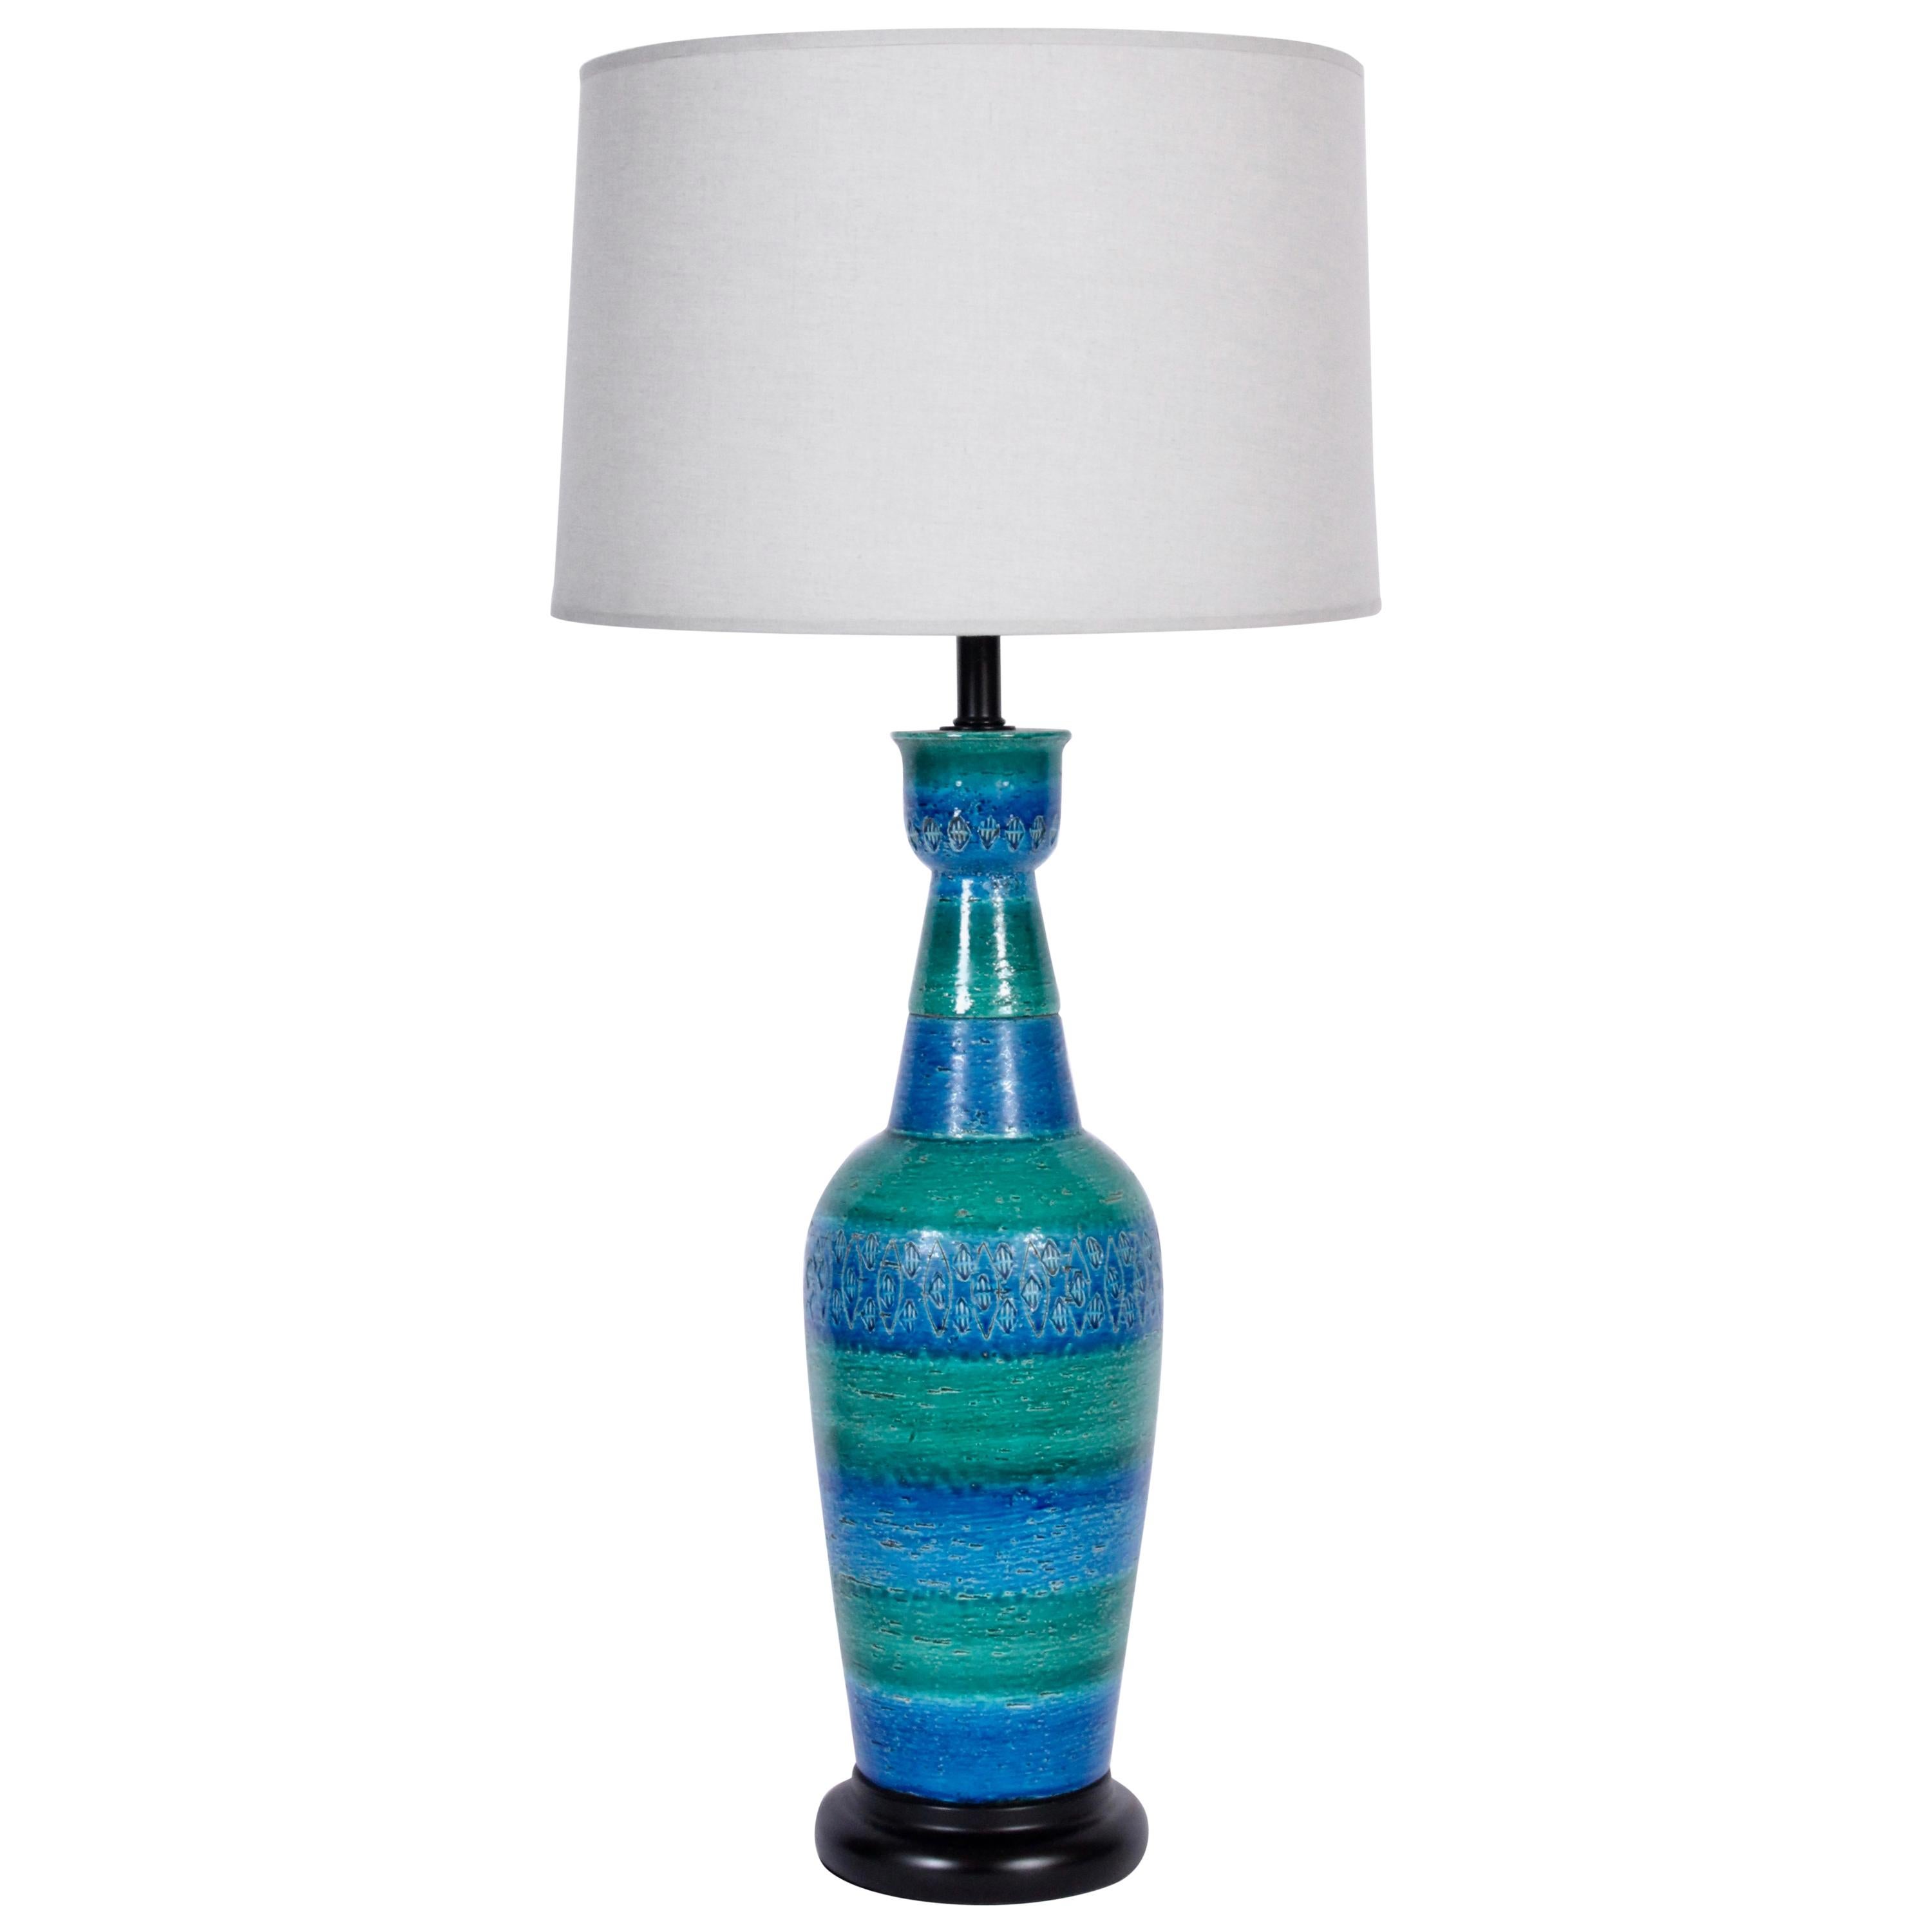 Substantial Aldo Londi Bitossi Incised Blue & Green Table Lamp, 1950's For Sale